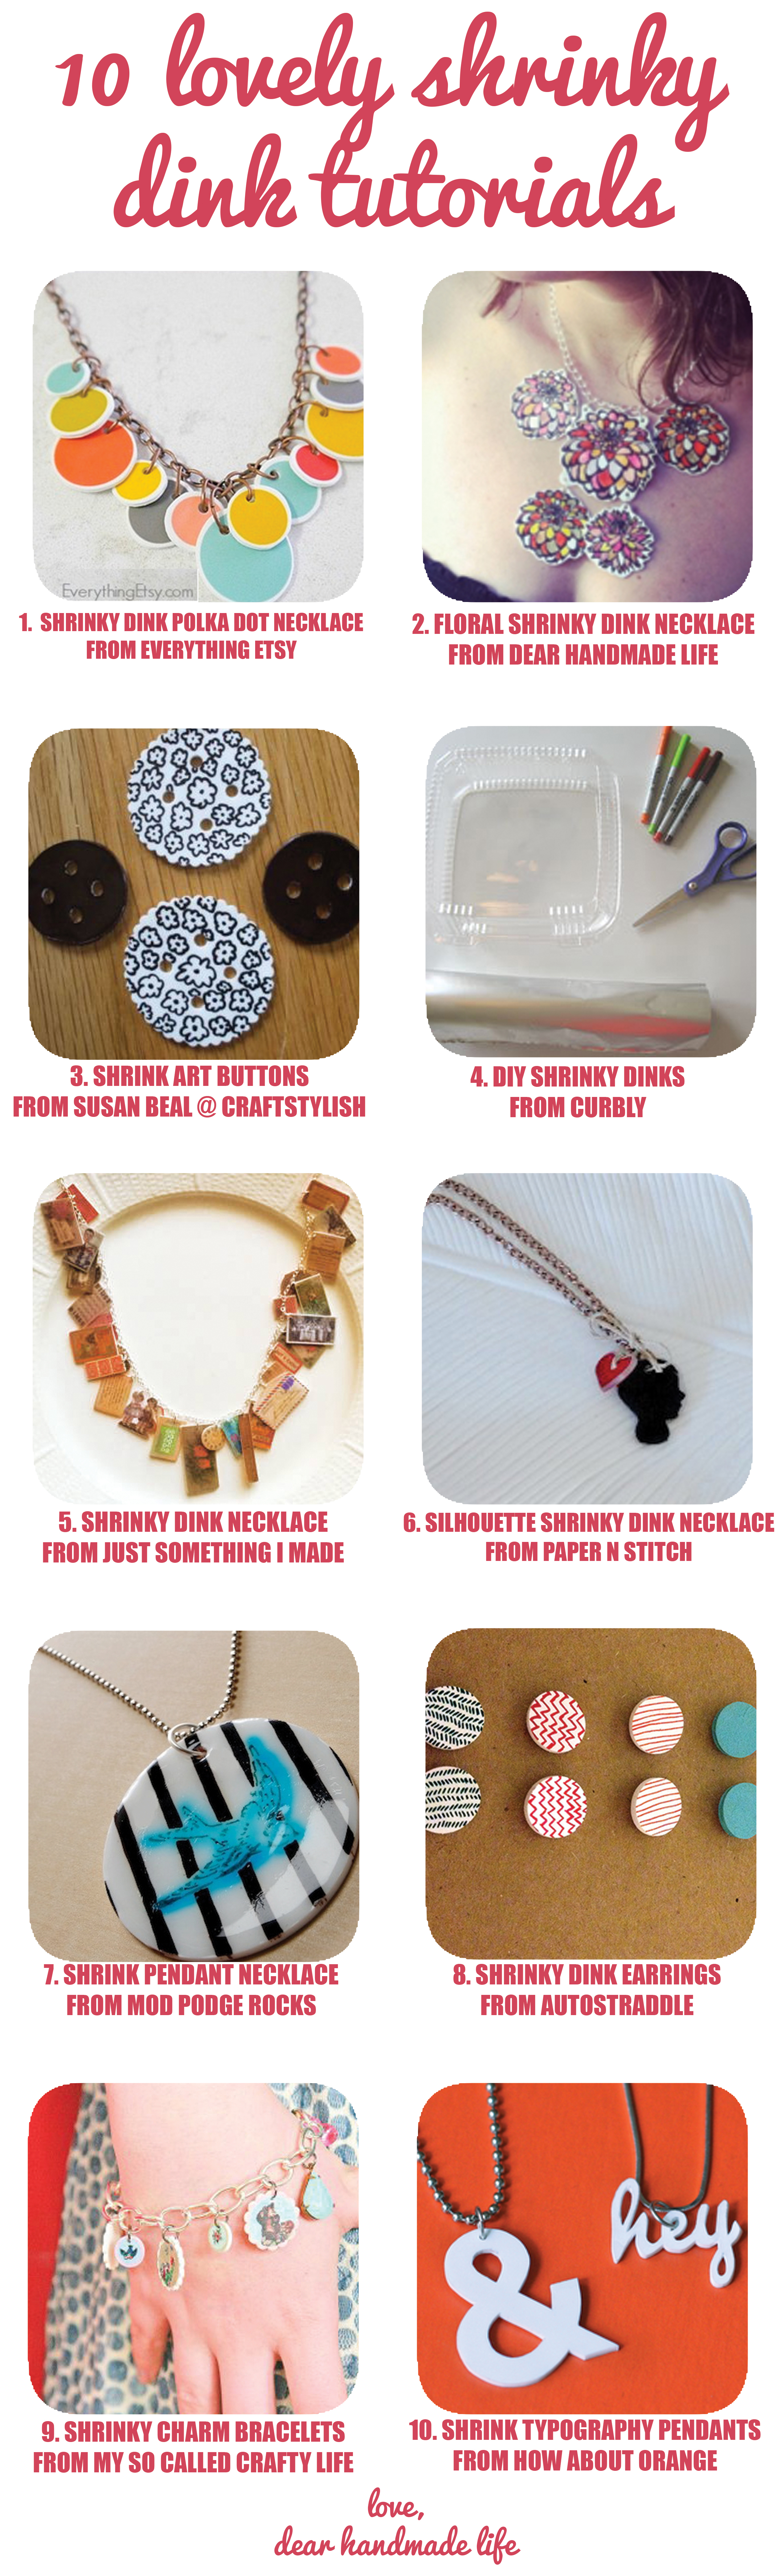 shrinky-dink-jewelry-tutorial-craft-diy-indie-necklace-button-earring-pendant-ten-craft-kids